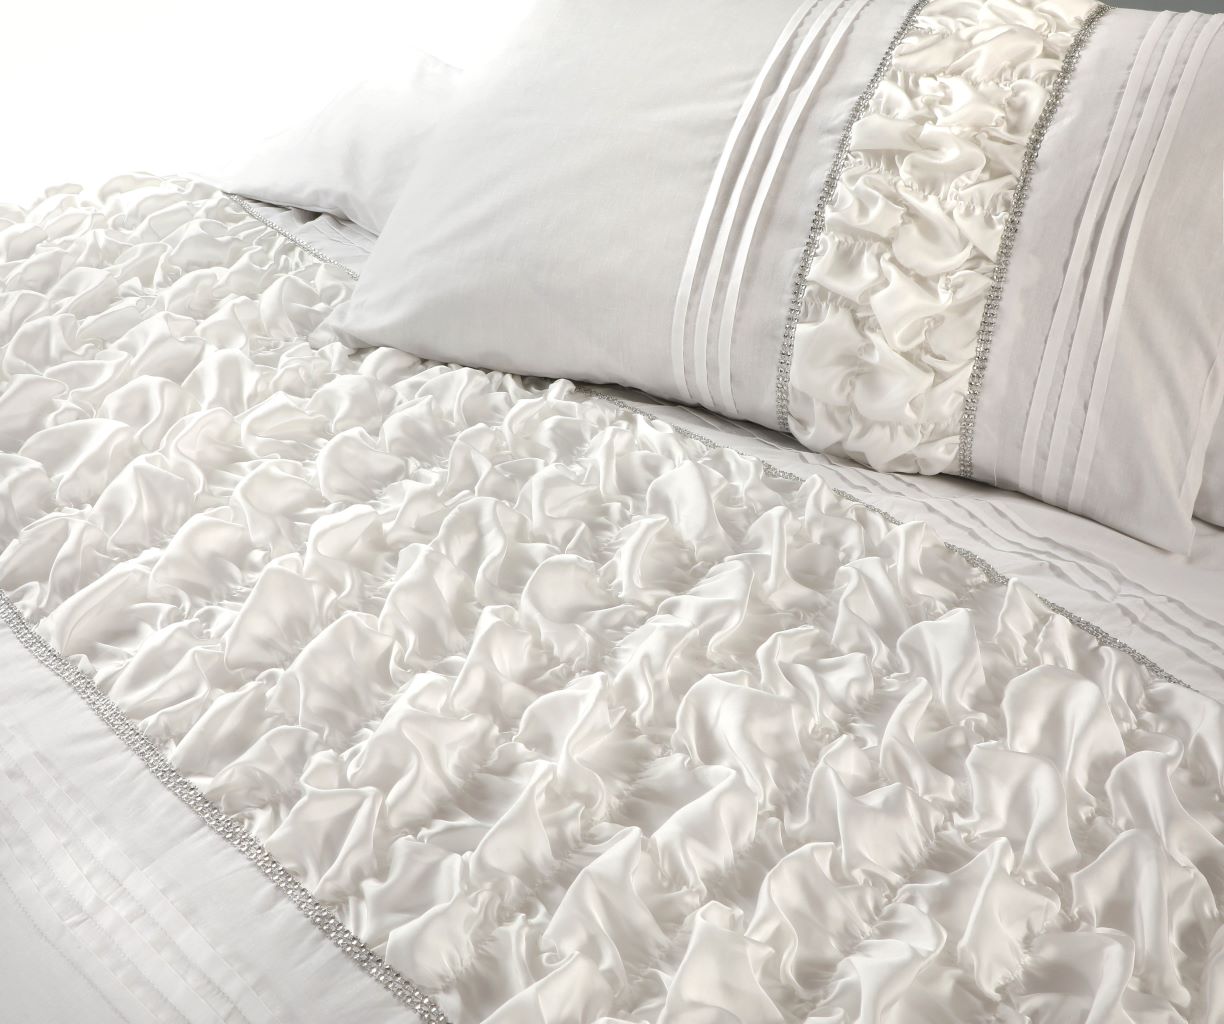 Ruffled Diamond Lace Sequence Aurora Luxury Bedding Easy Care Polycotton Duvet Cover Set